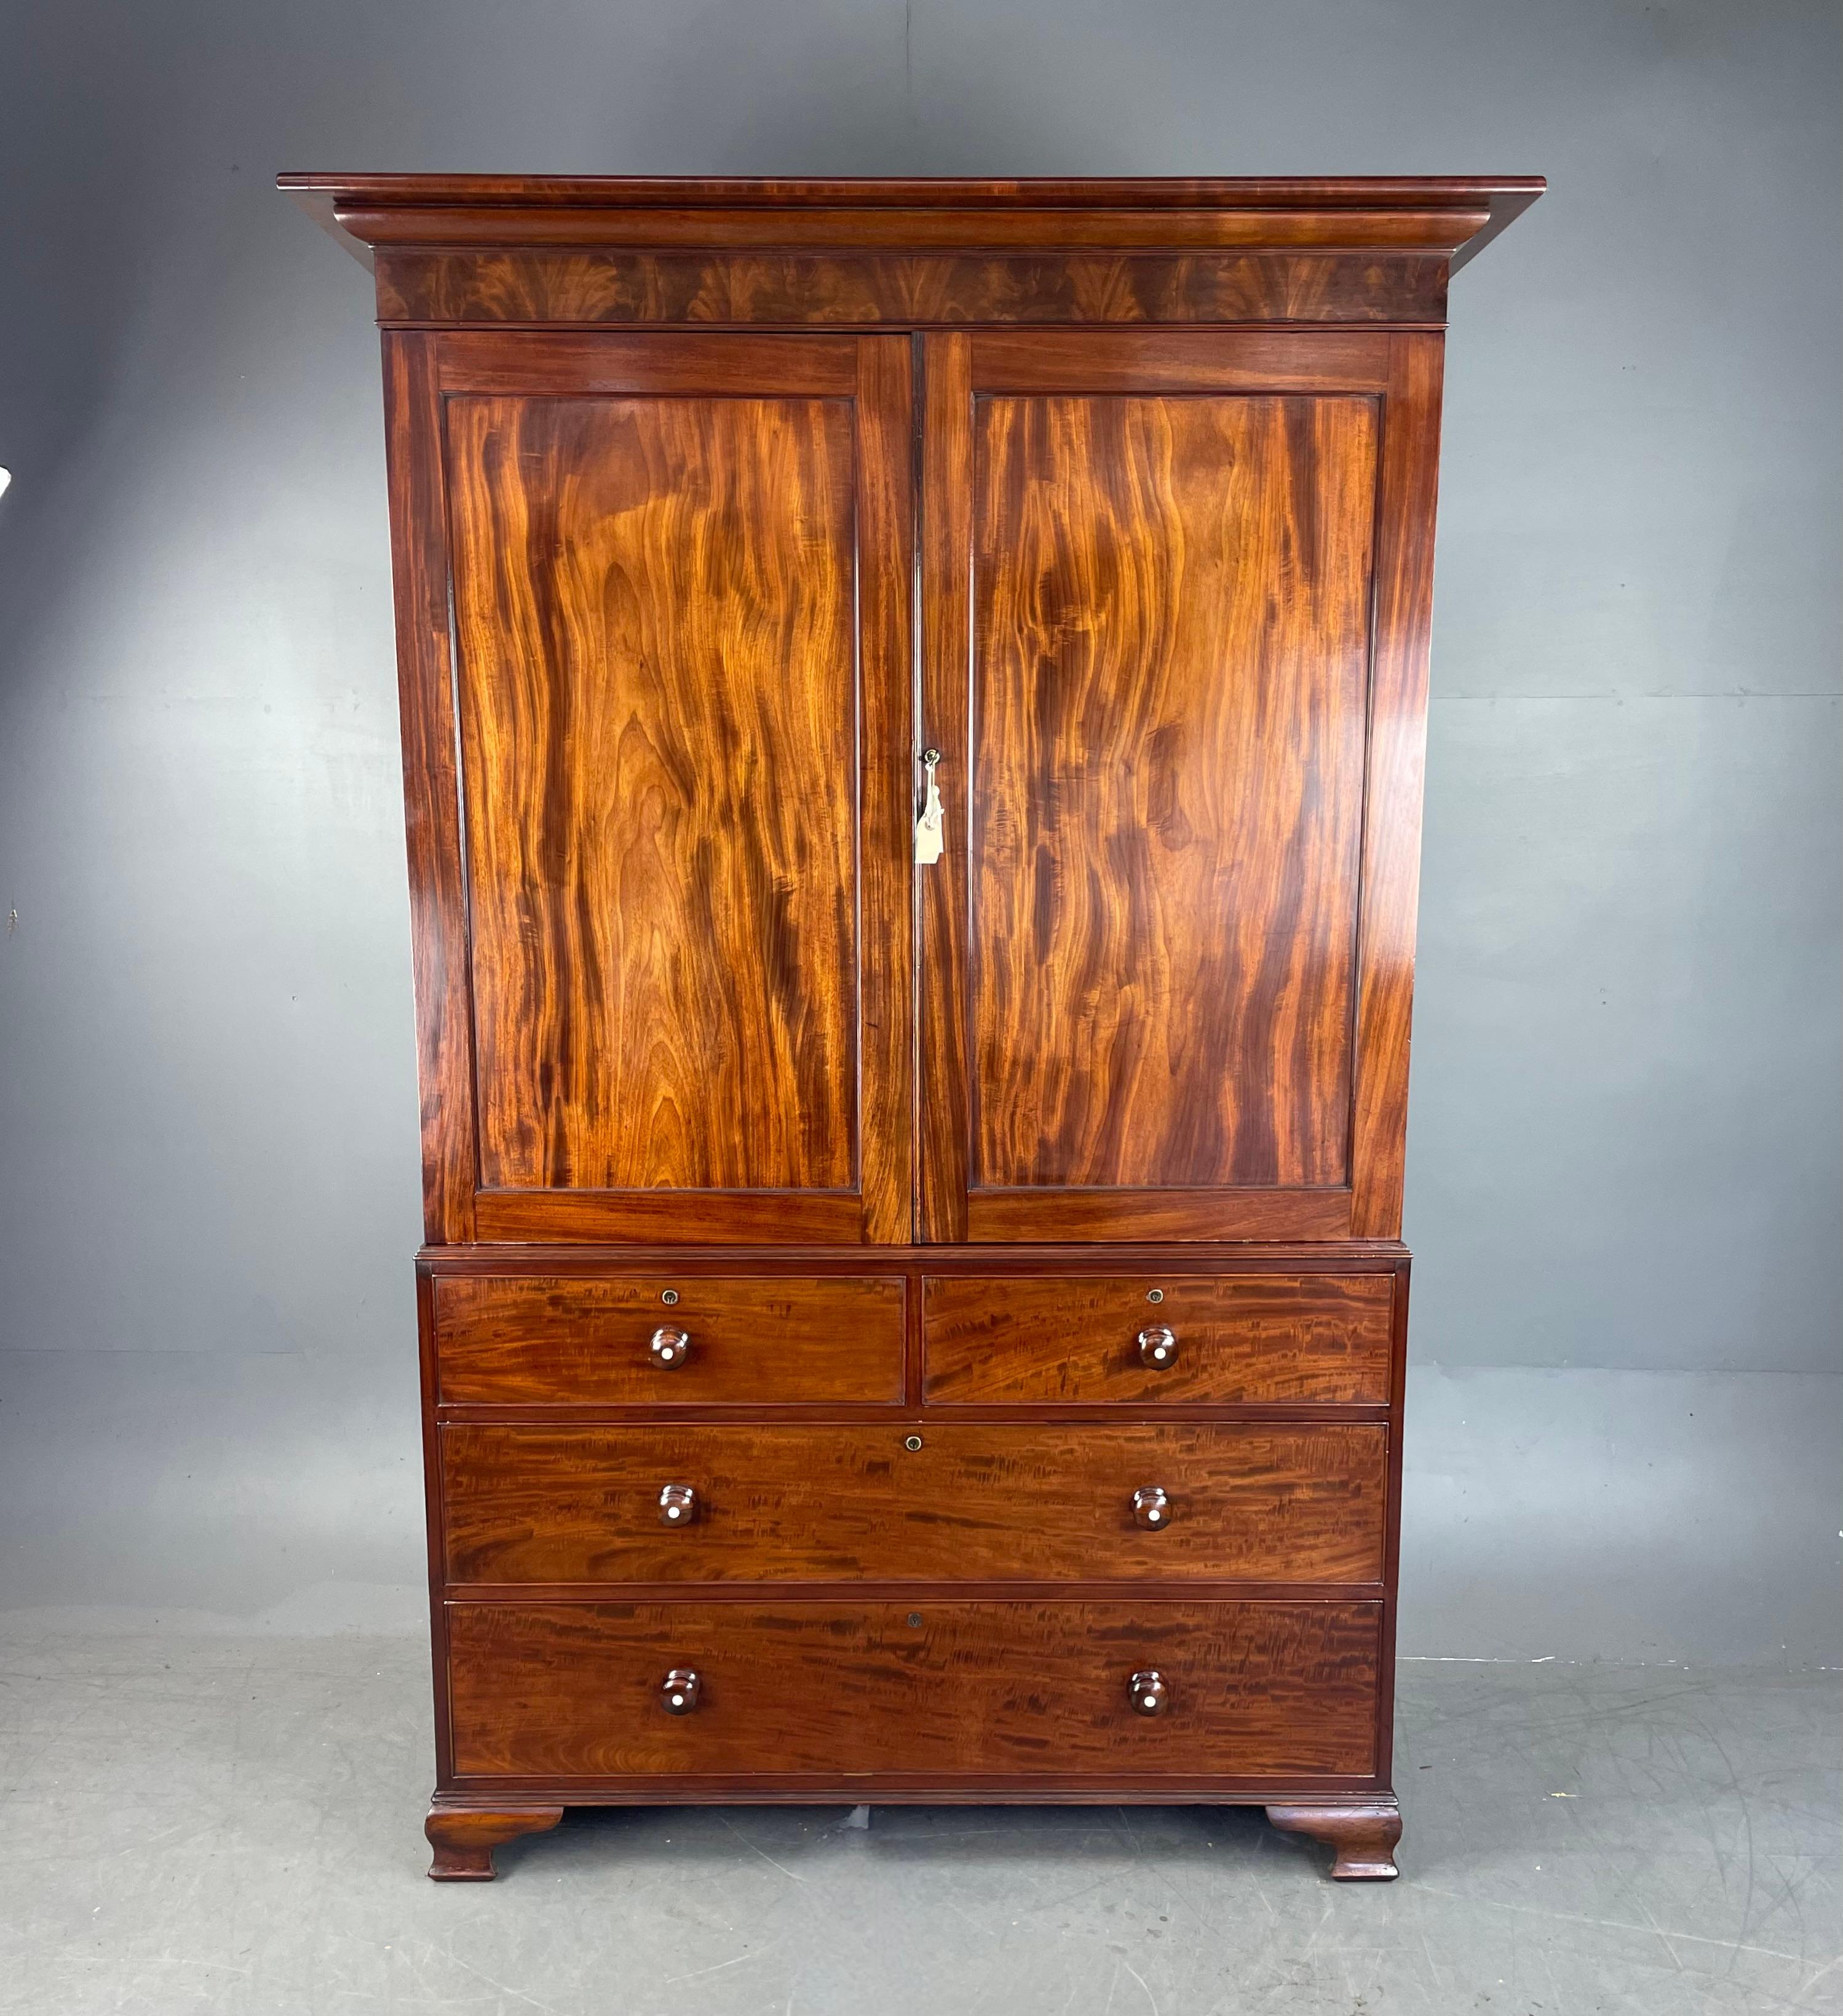 Fine Quality early 19th century flame mahogany linen press /wardrobe .
The press is in very good original condition having been professionally cleaned and traditionally waxed finished to maintain the fantastic colour and grain of the fine figured